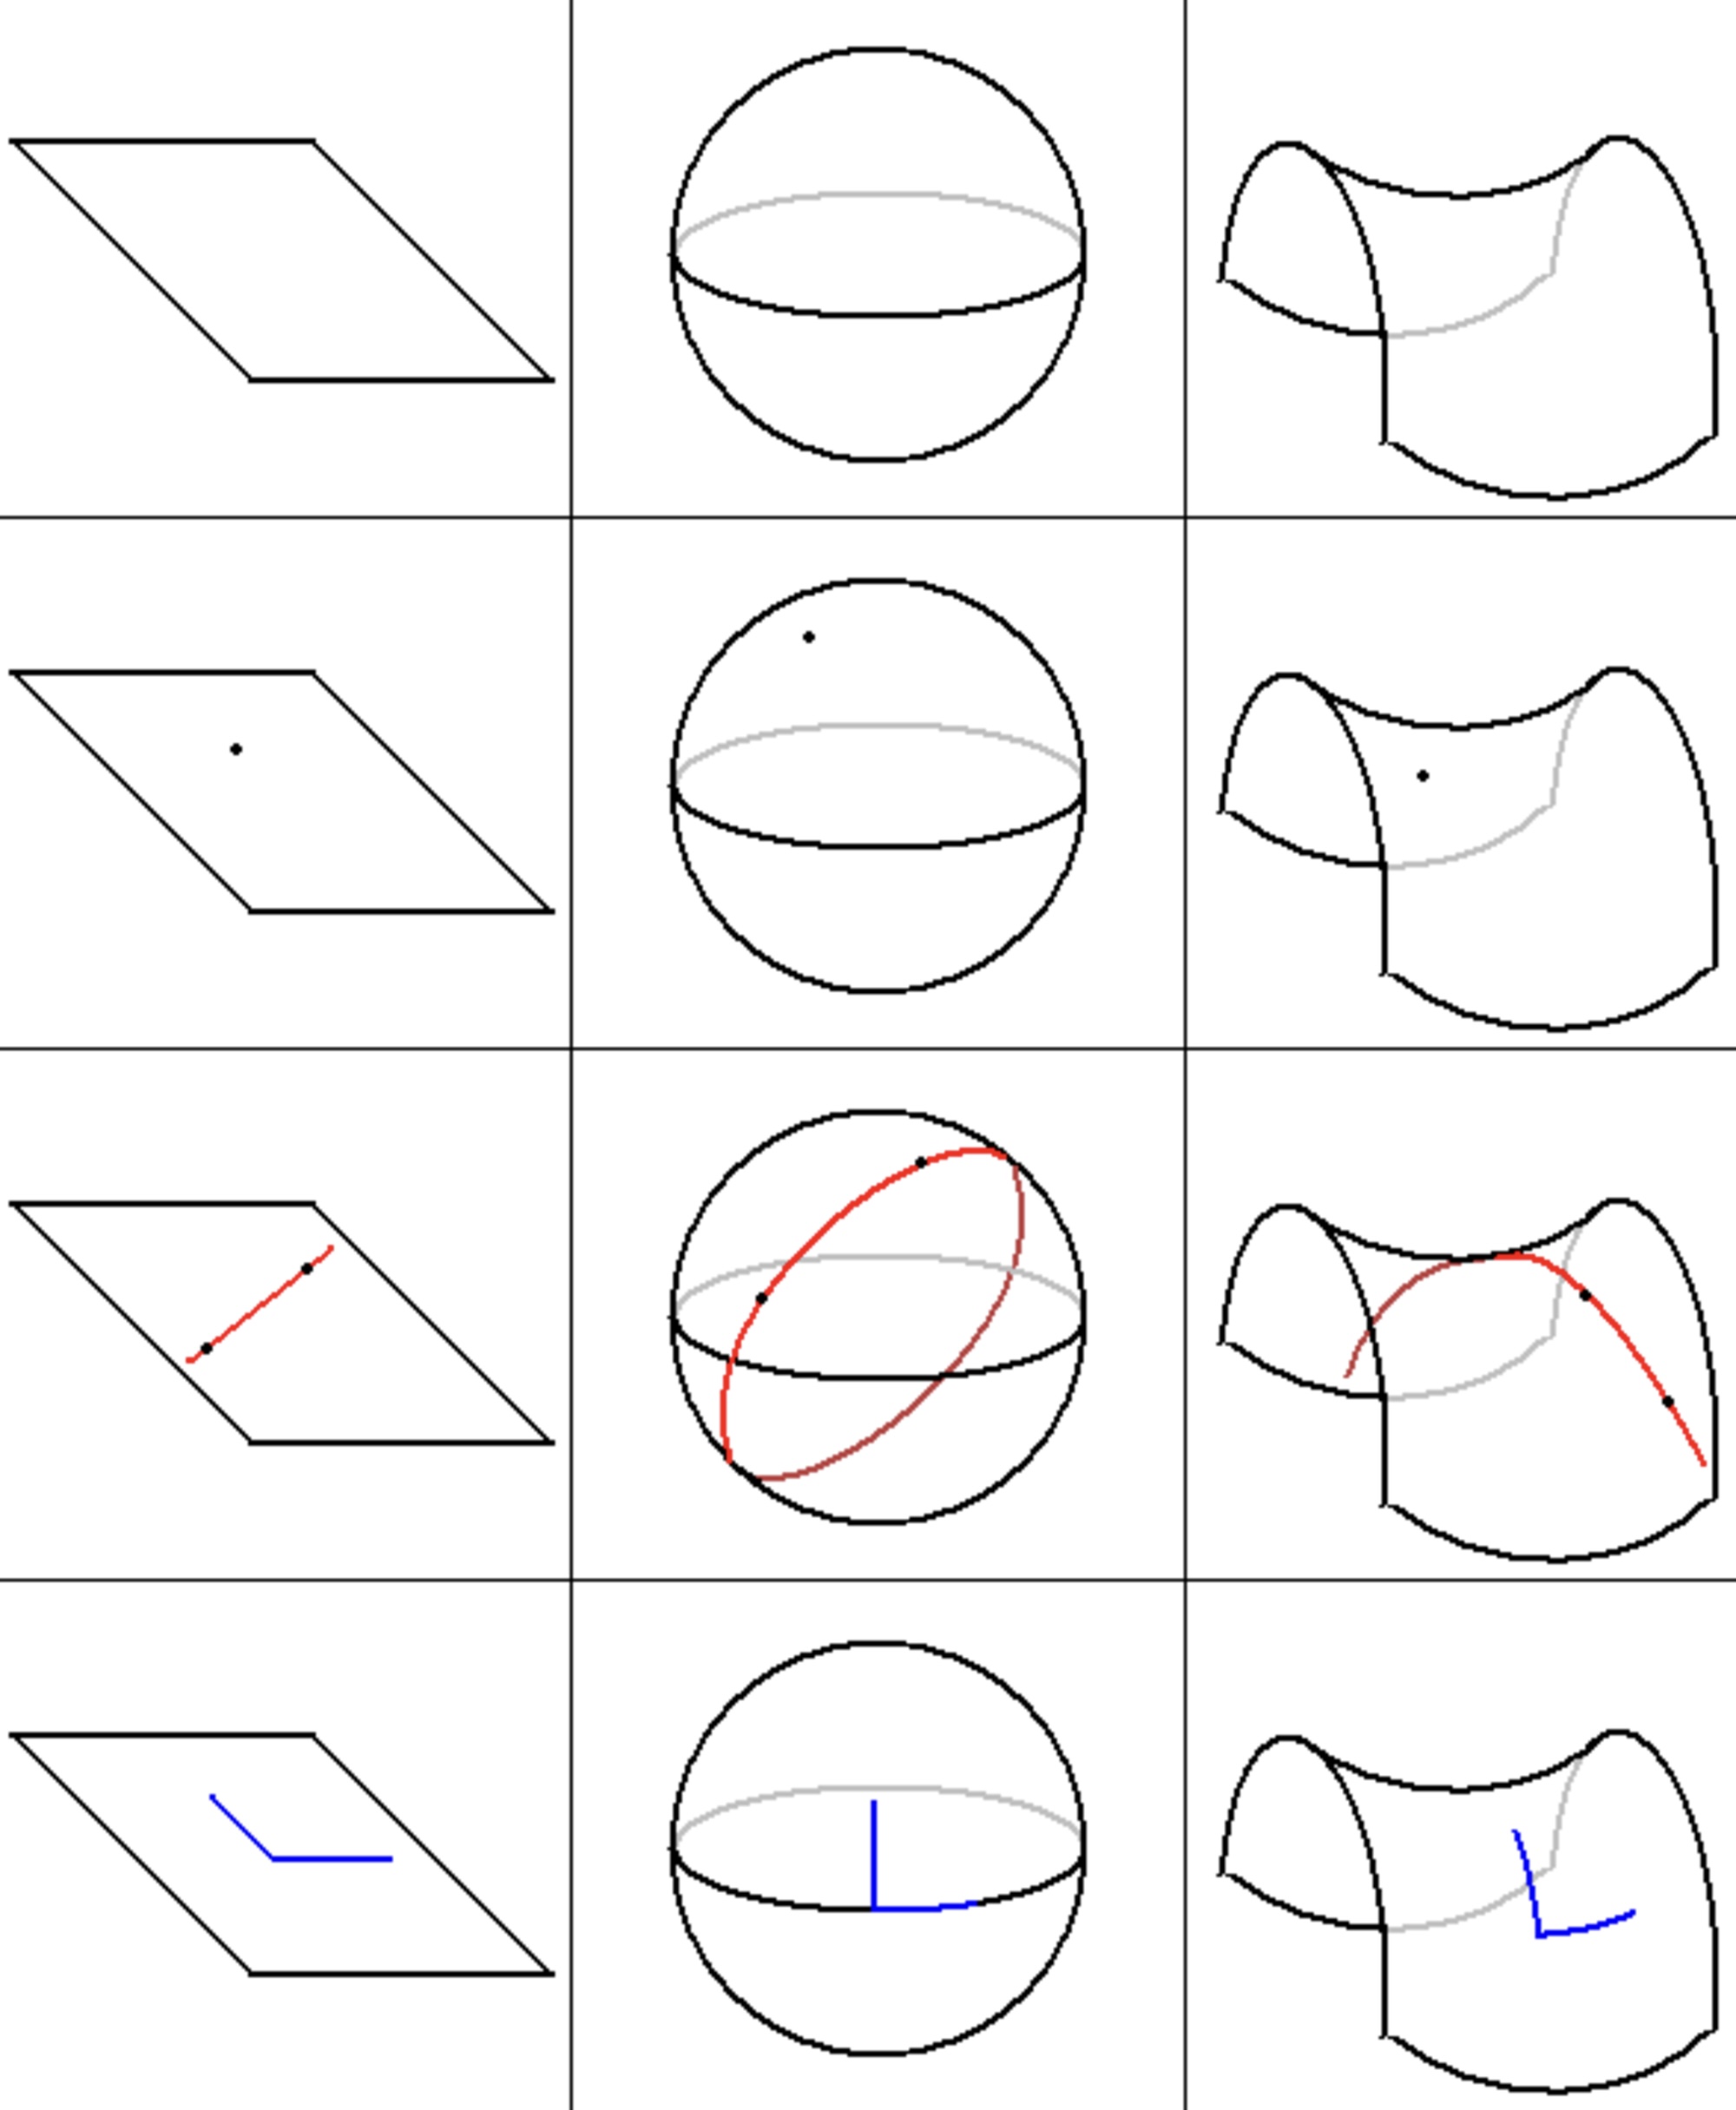 a diagram of some shapes